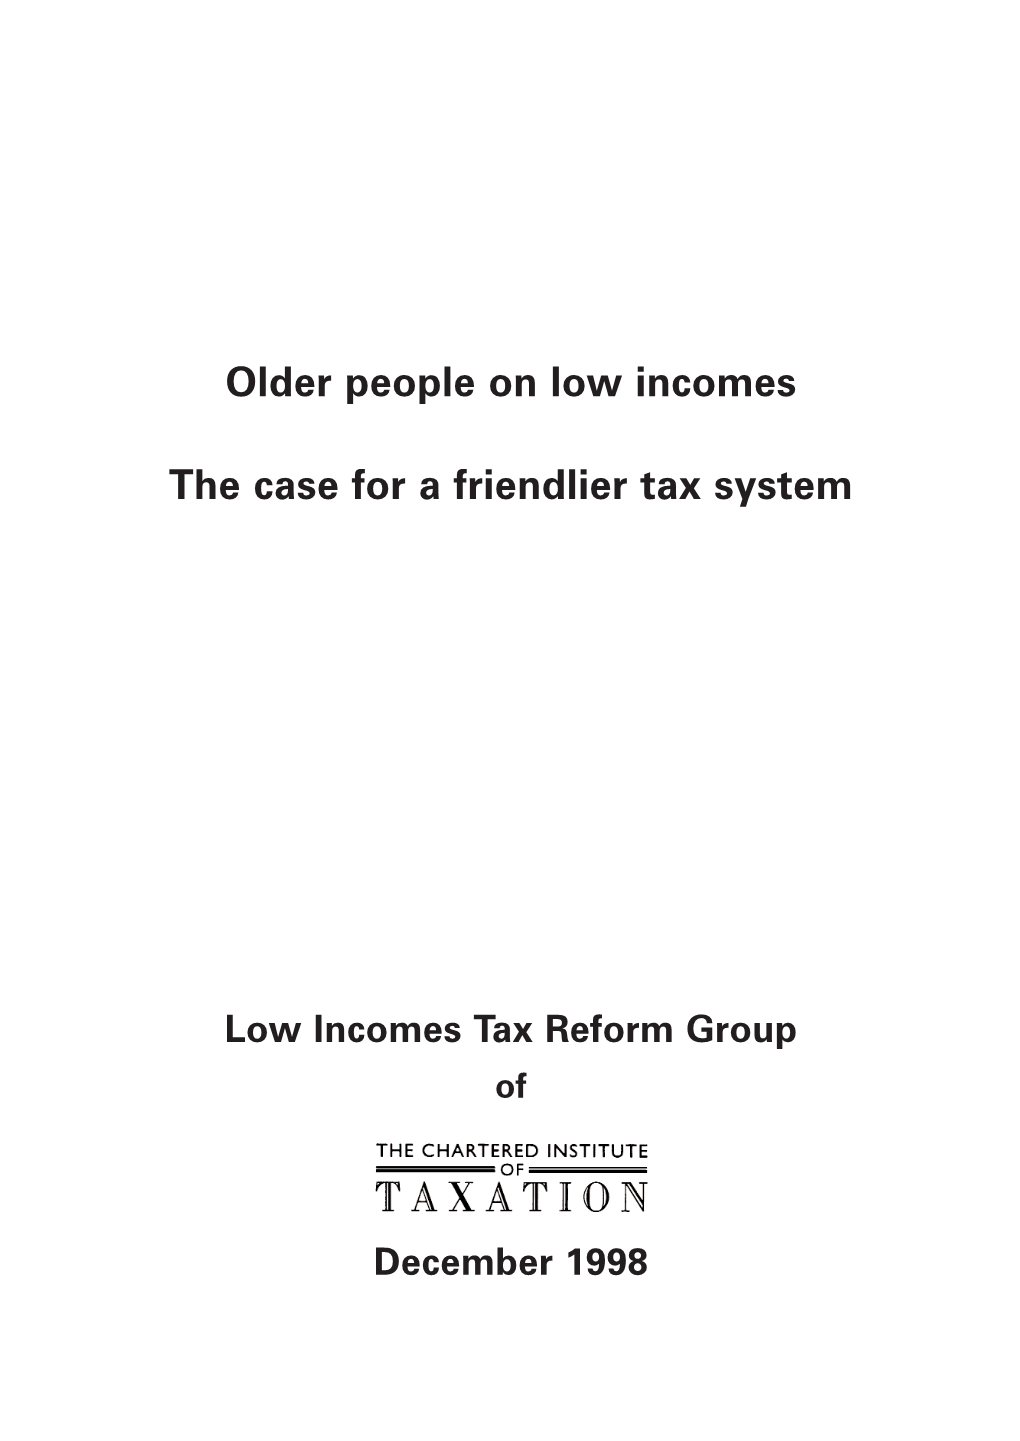 OLDER PEOPLE on LOW INCOMES the CASE for a FRIENDLIER TAX SYSTEM Contents